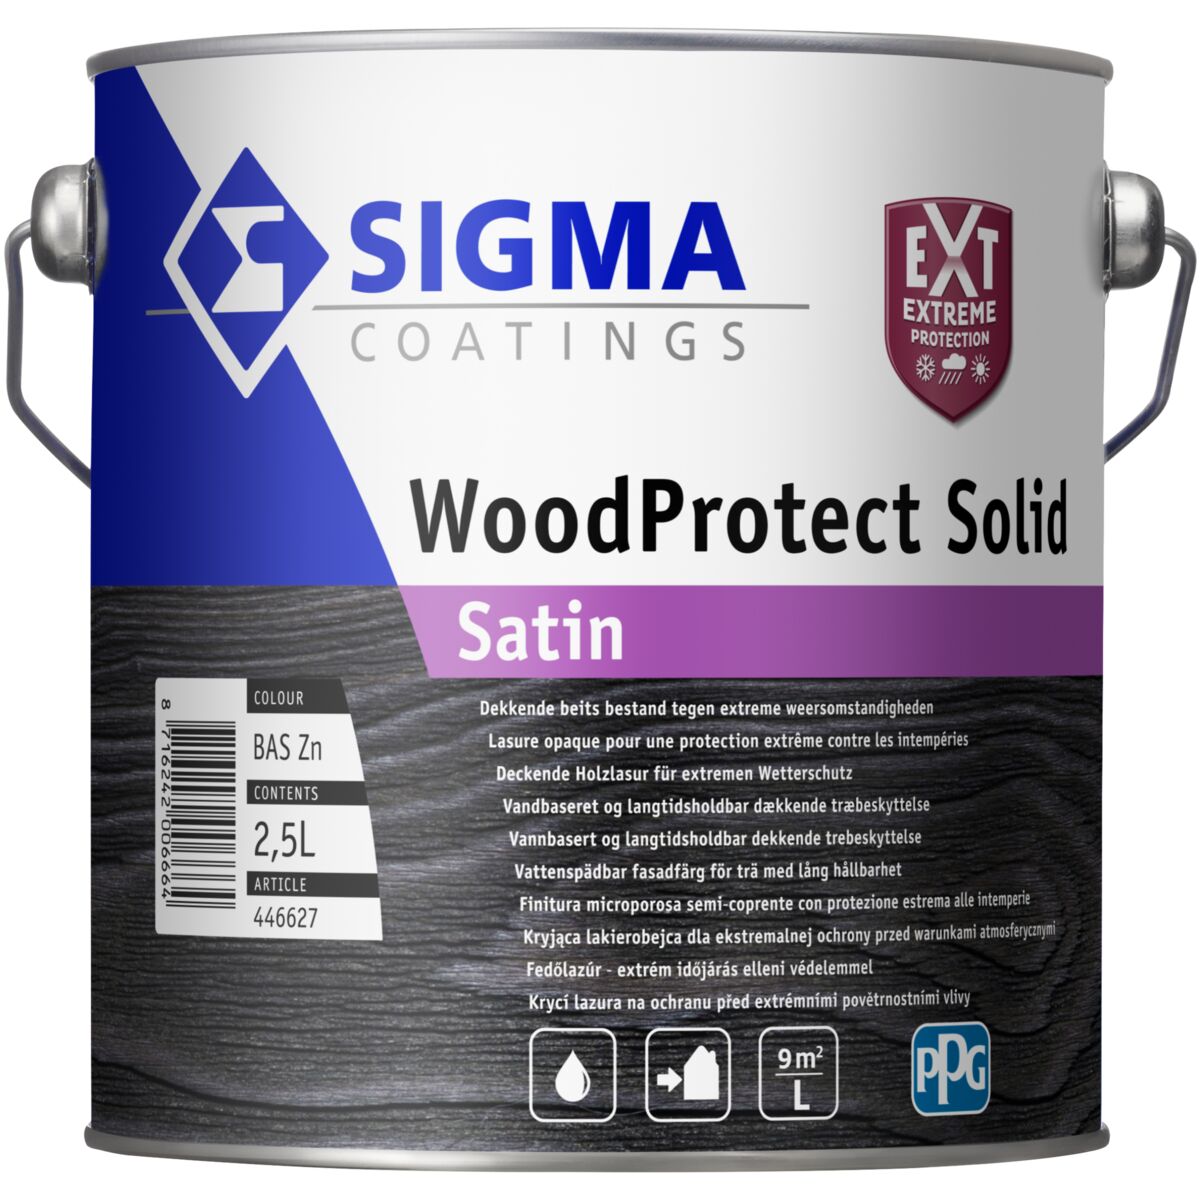 WOODPROTECT SOLID